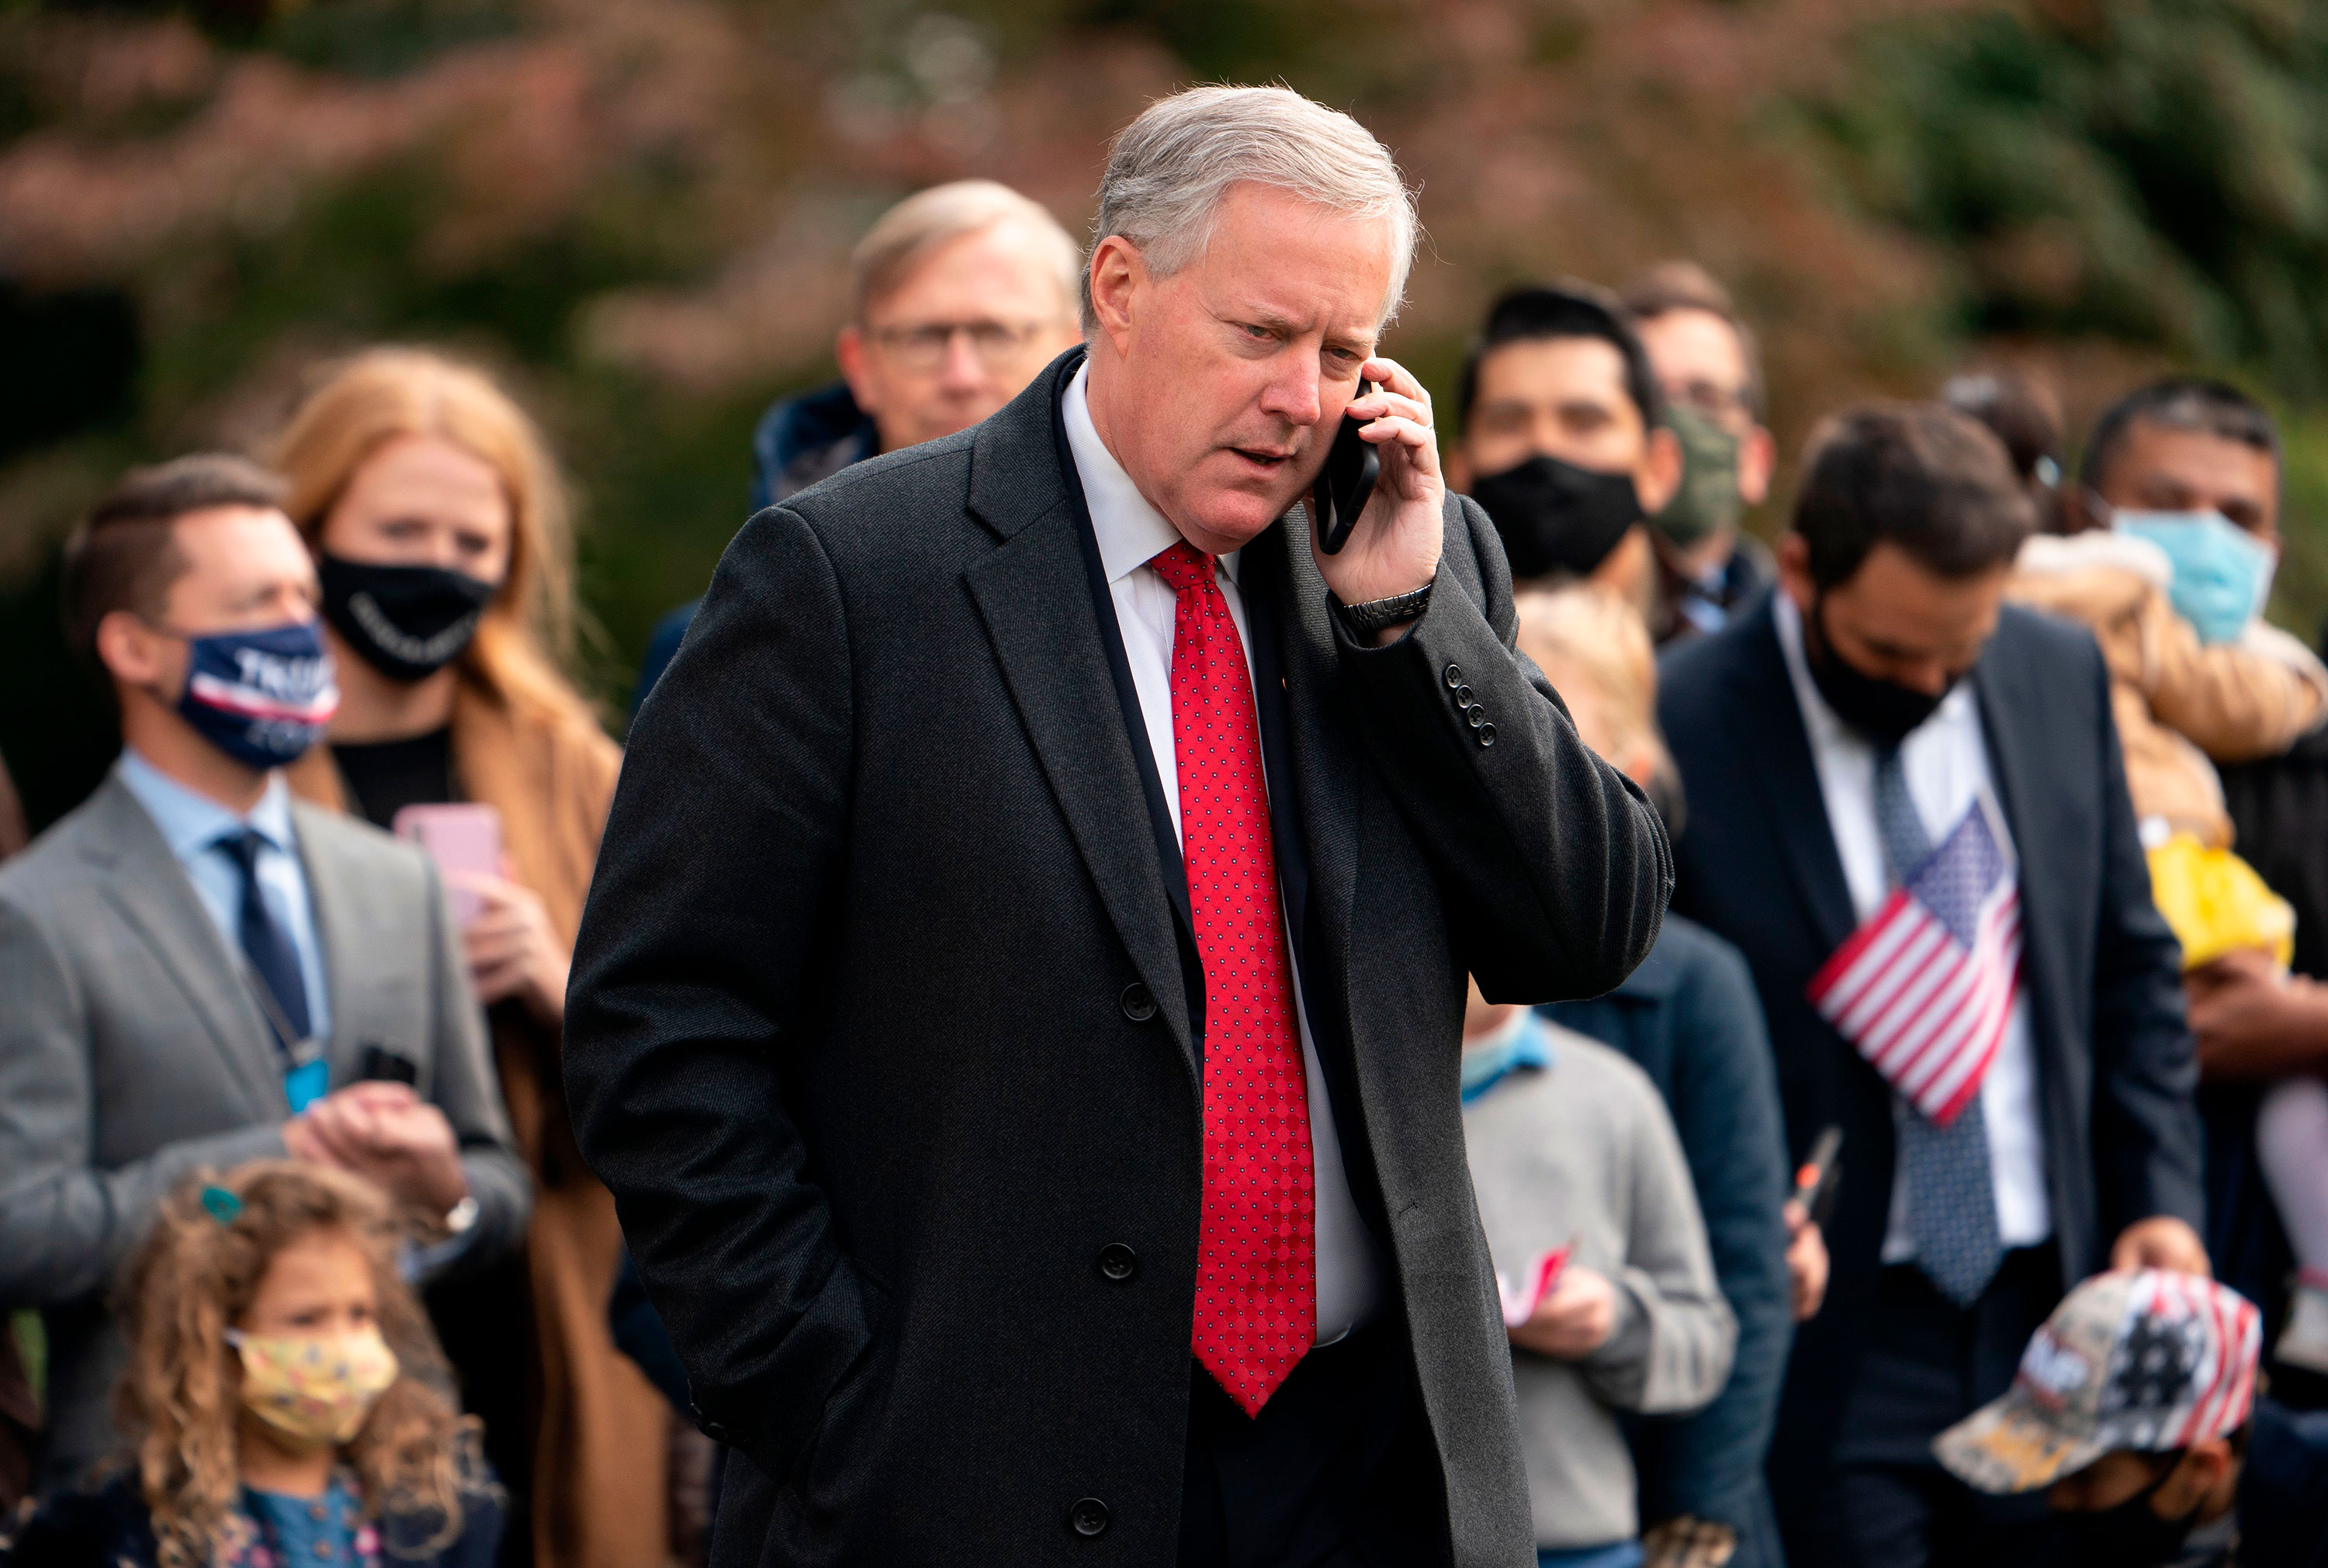 White House Chief of Staff Mark Meadows speaks on his phone as he waits for US President Donald Trump to depart the White House on October 30, 2020 in Washington, DC. - Trump travels to Michigan, Wisconsin and Minnesota for campaign rallies. (Photo by ANDREW CABALLERO-REYNOLDS / AFP) (Photo by ANDREW CABALLERO-REYNOLDS/AFP via Getty Images)